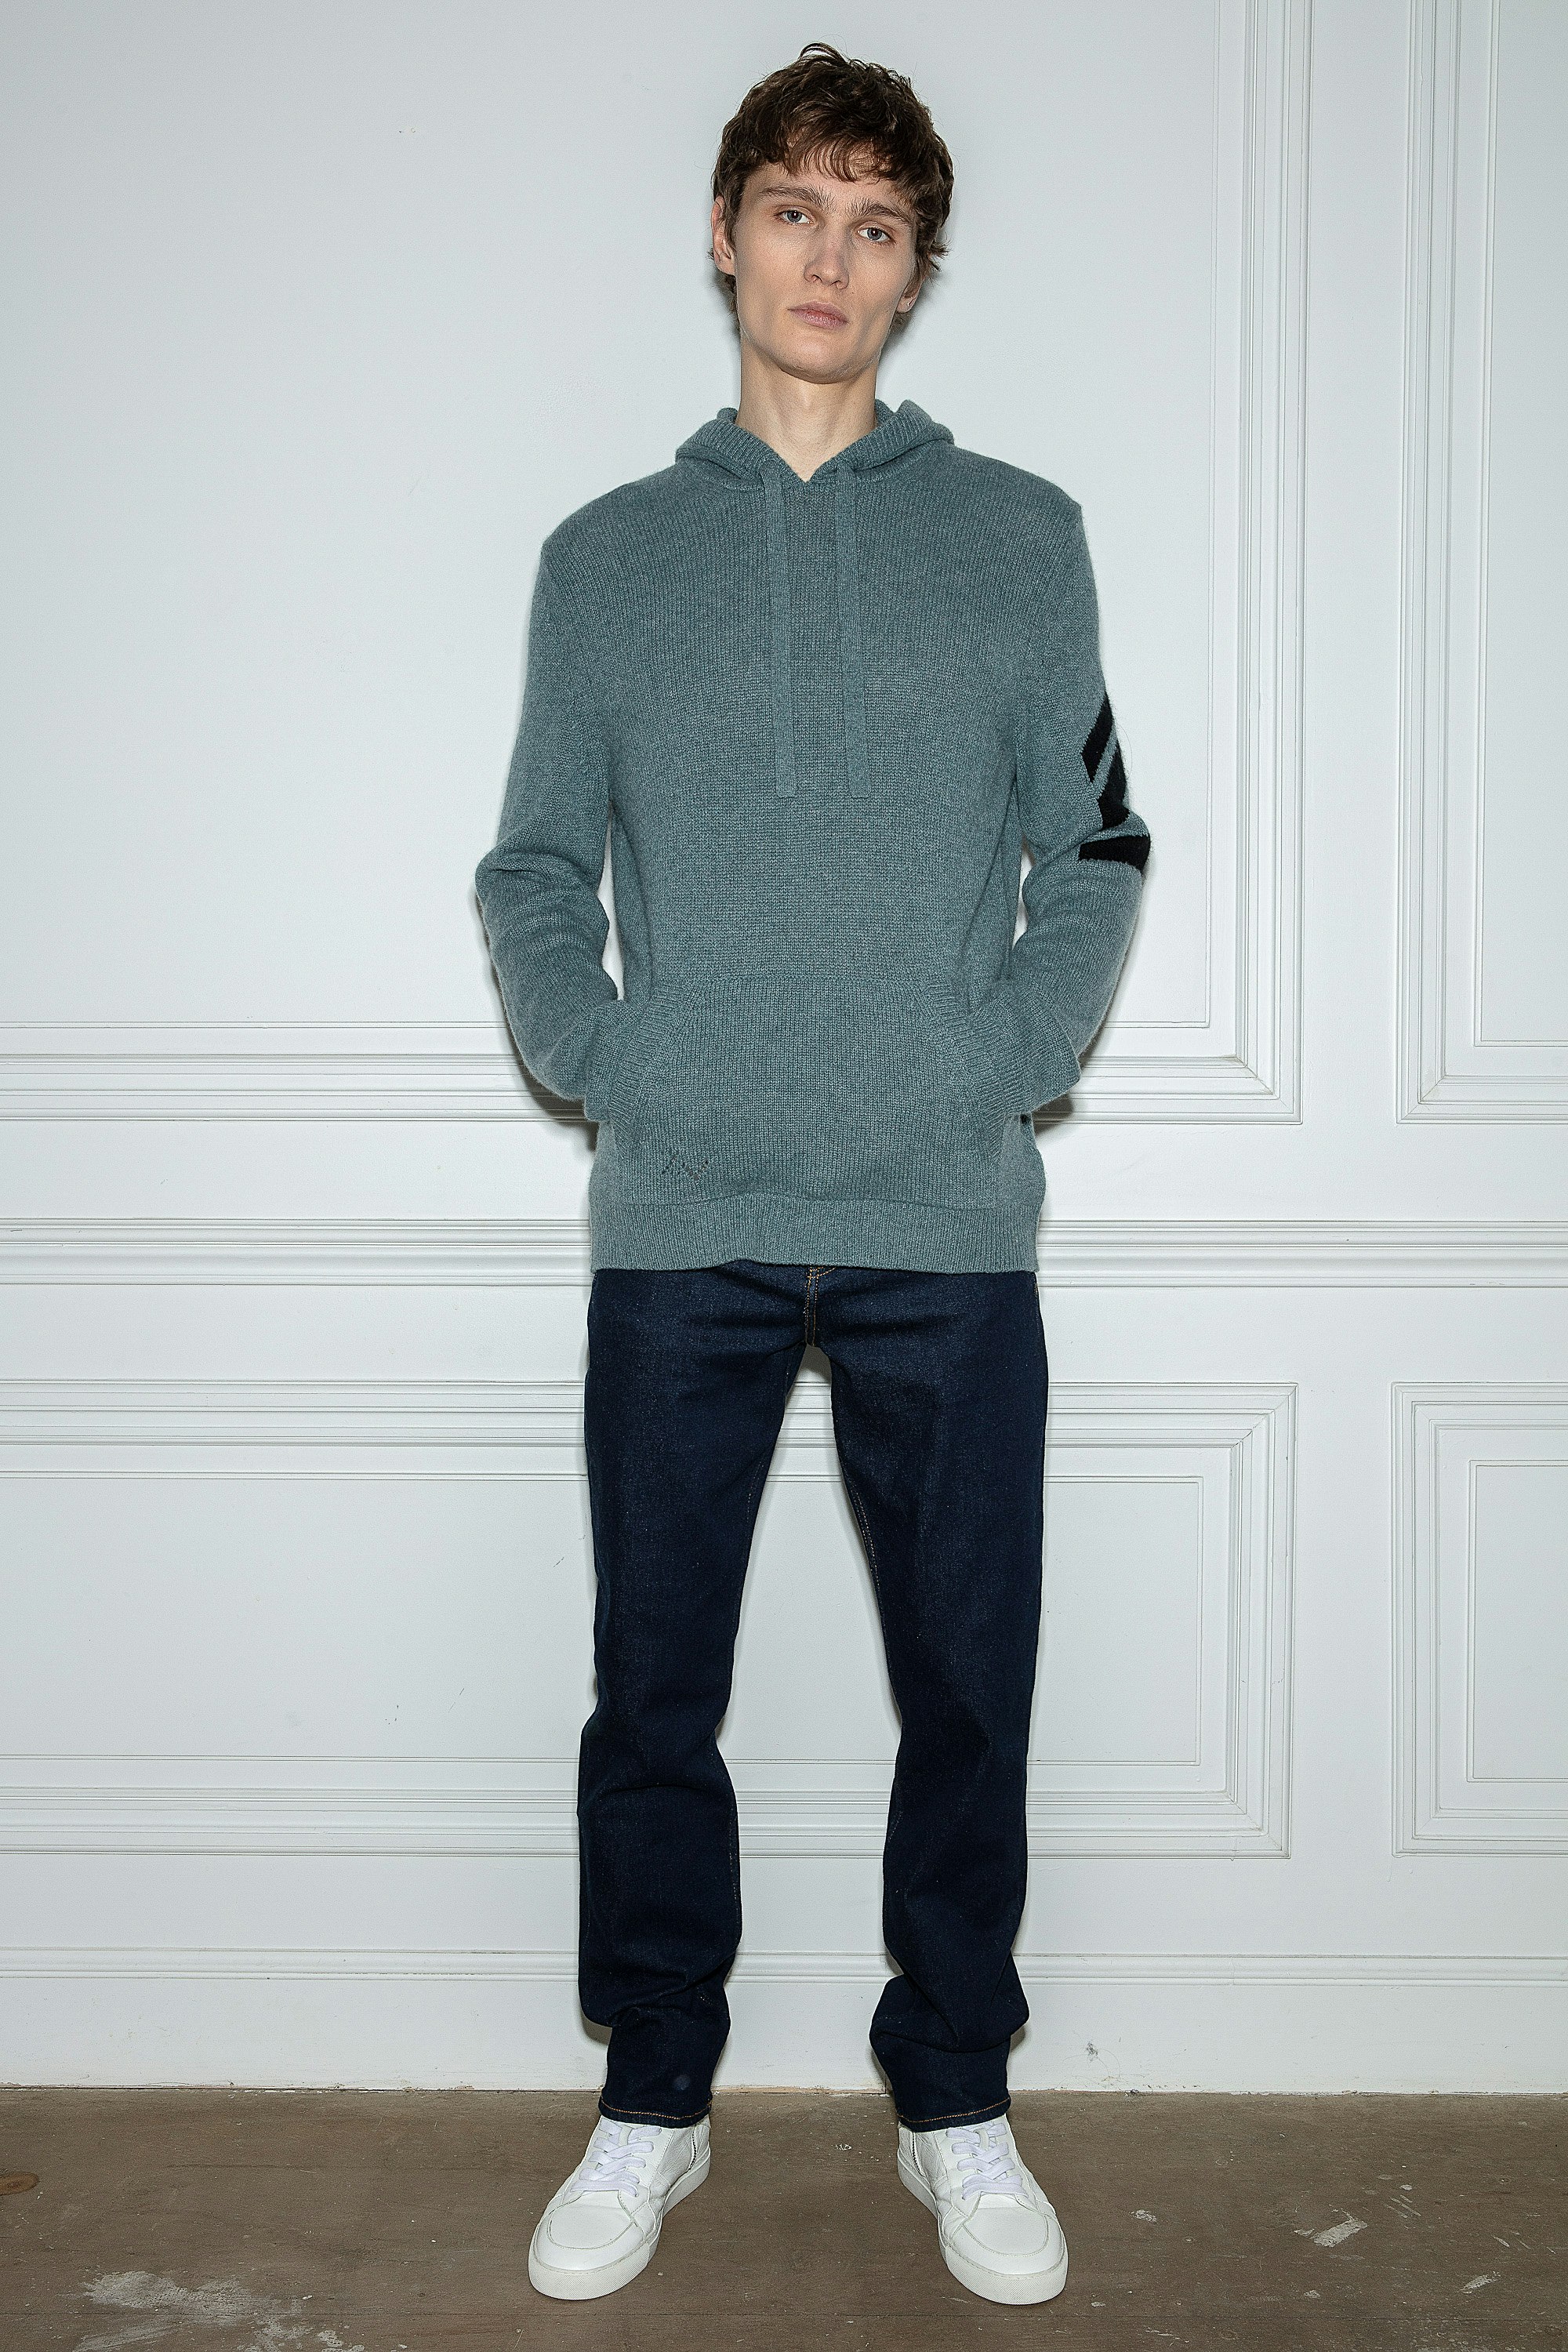 Clay Arrow Cashmere Sweater Men's long-sleeve hooded sweater in blue cashmere with arrow motifs